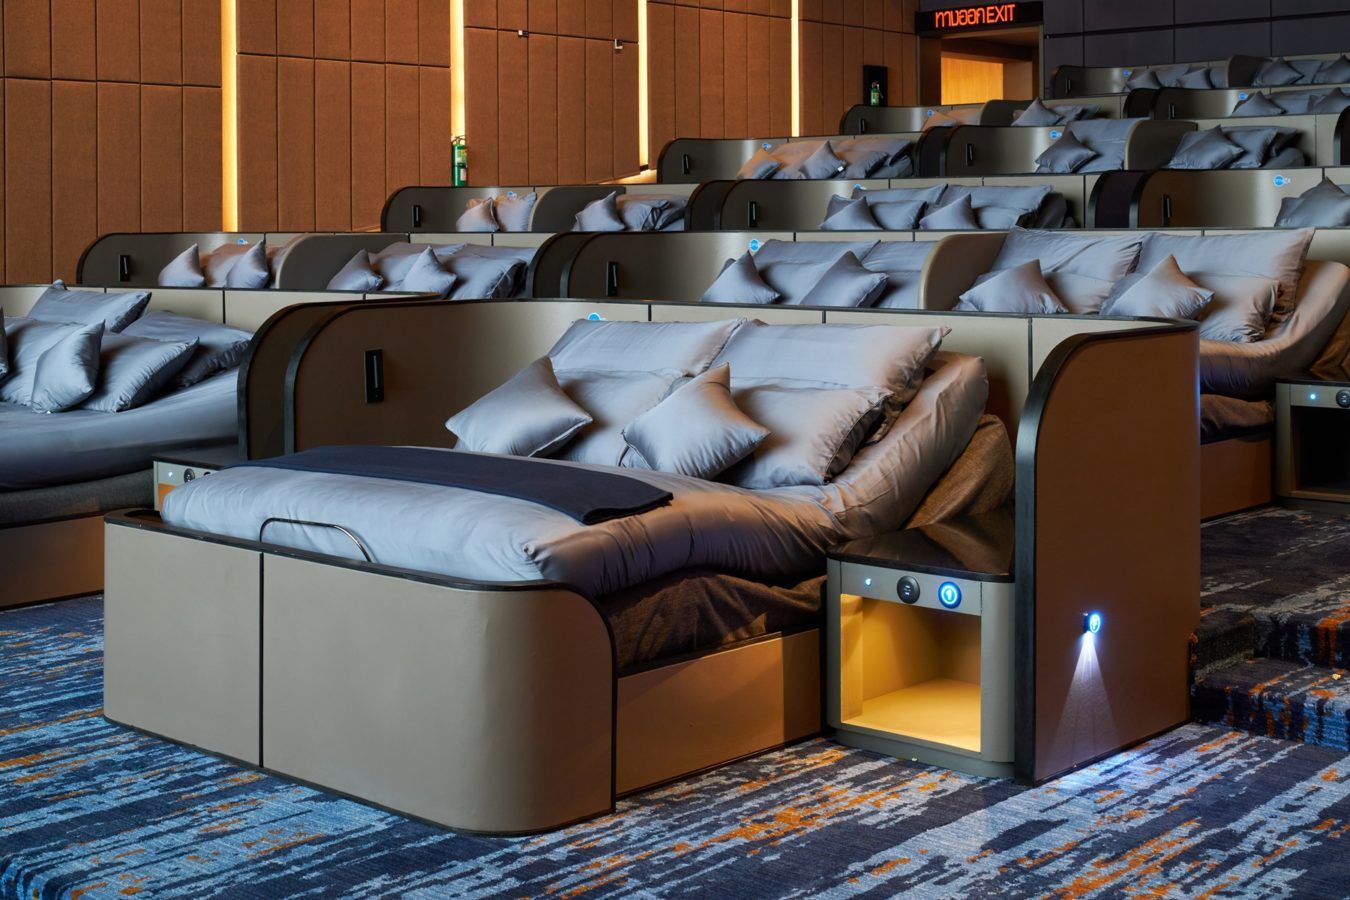 Experience a literal “bed cinema” with SF Cinema and Omazz